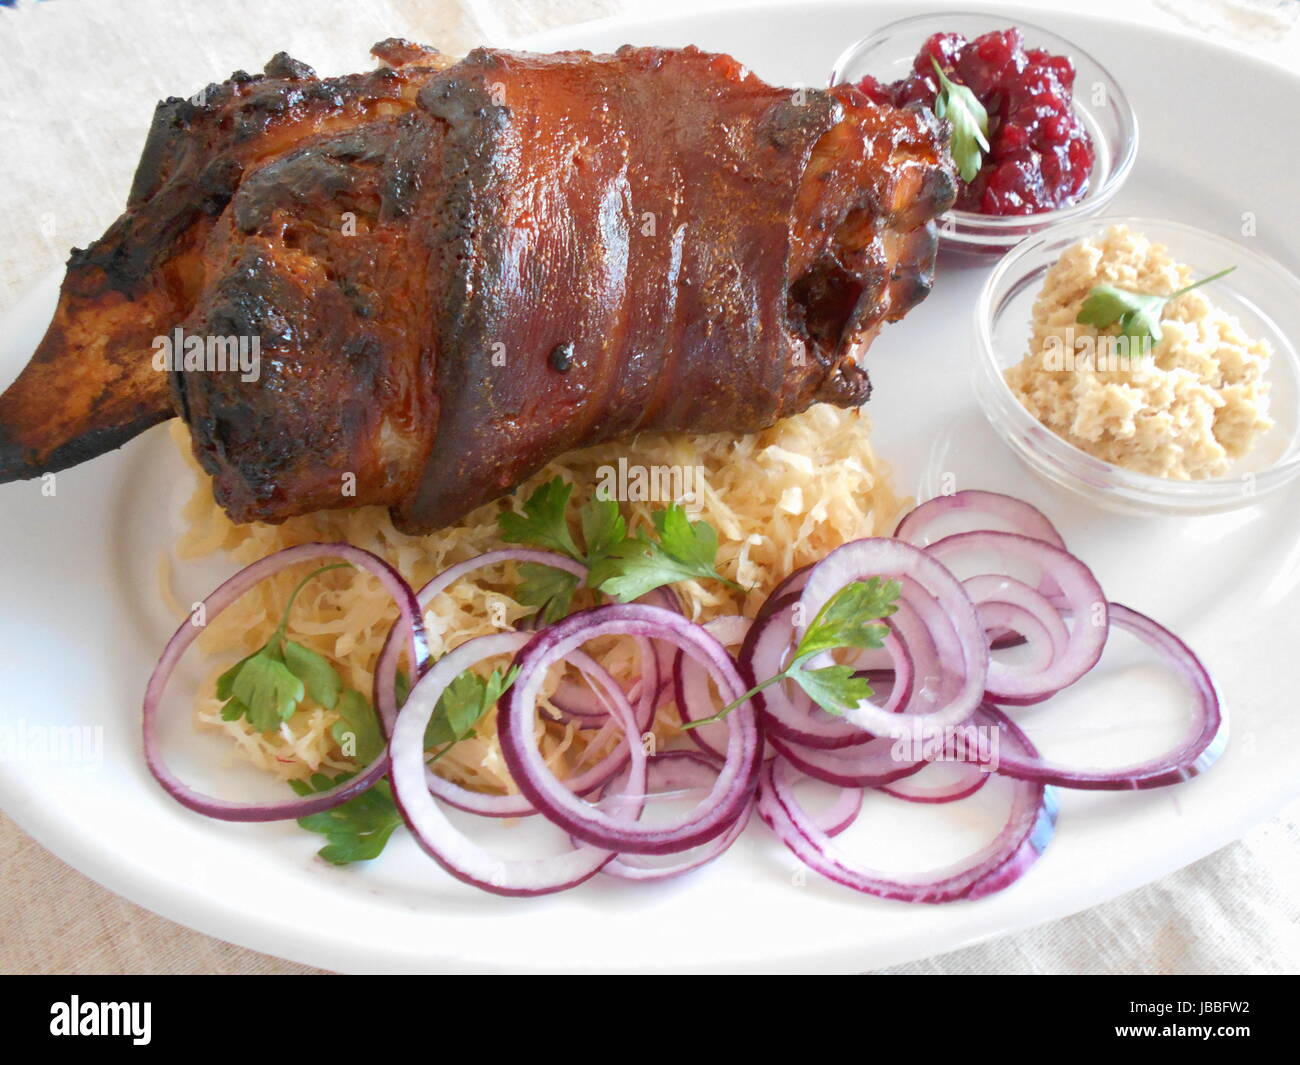 Traditional Czech dish of roasted pork leg with fresh red onions, horseredish, sauerkraut, cranberry sauce on a white plate. Stock Photo